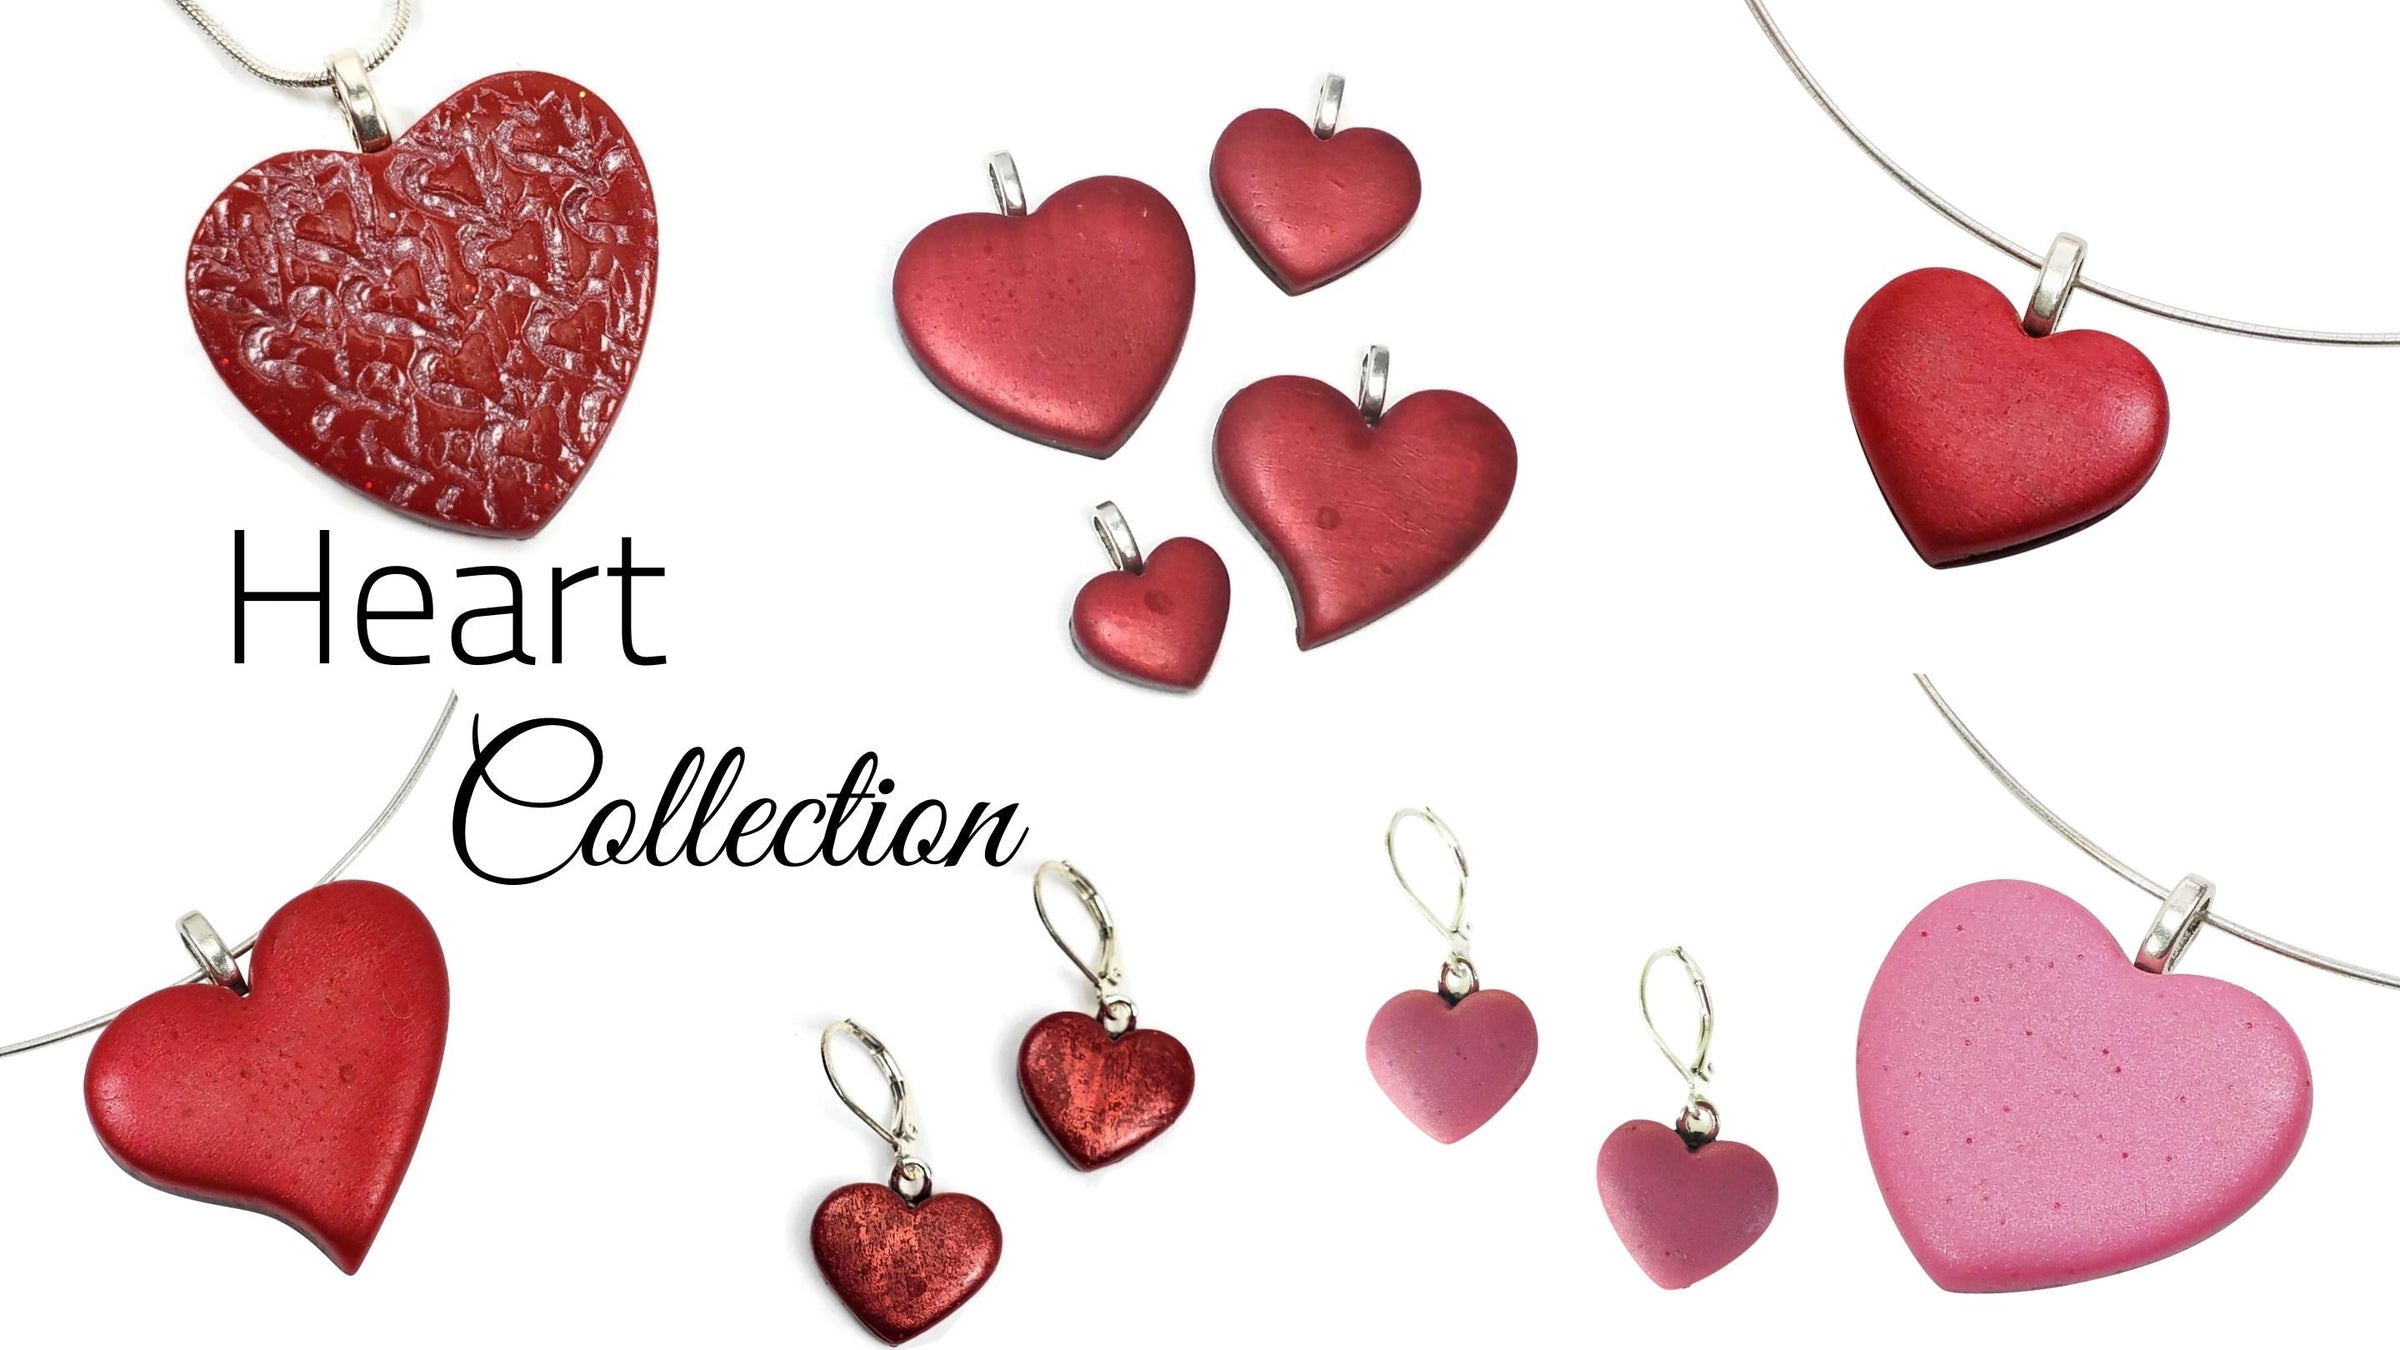 The Heart Collection Tiry Originals